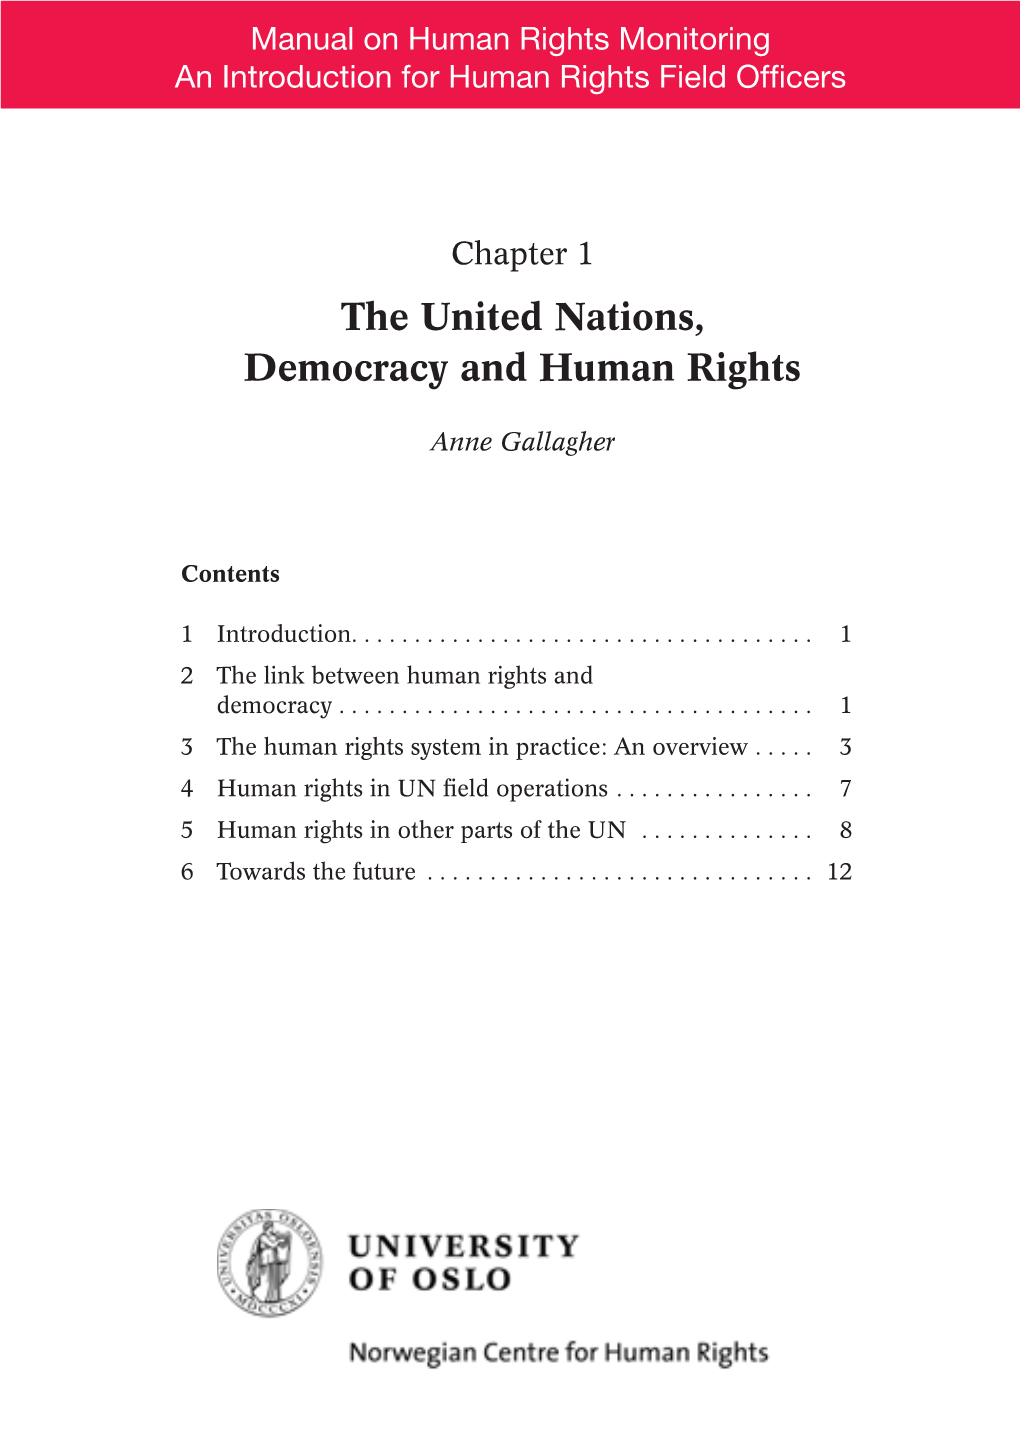 Chapter 1: the United Nations, Democracy and Human Rights